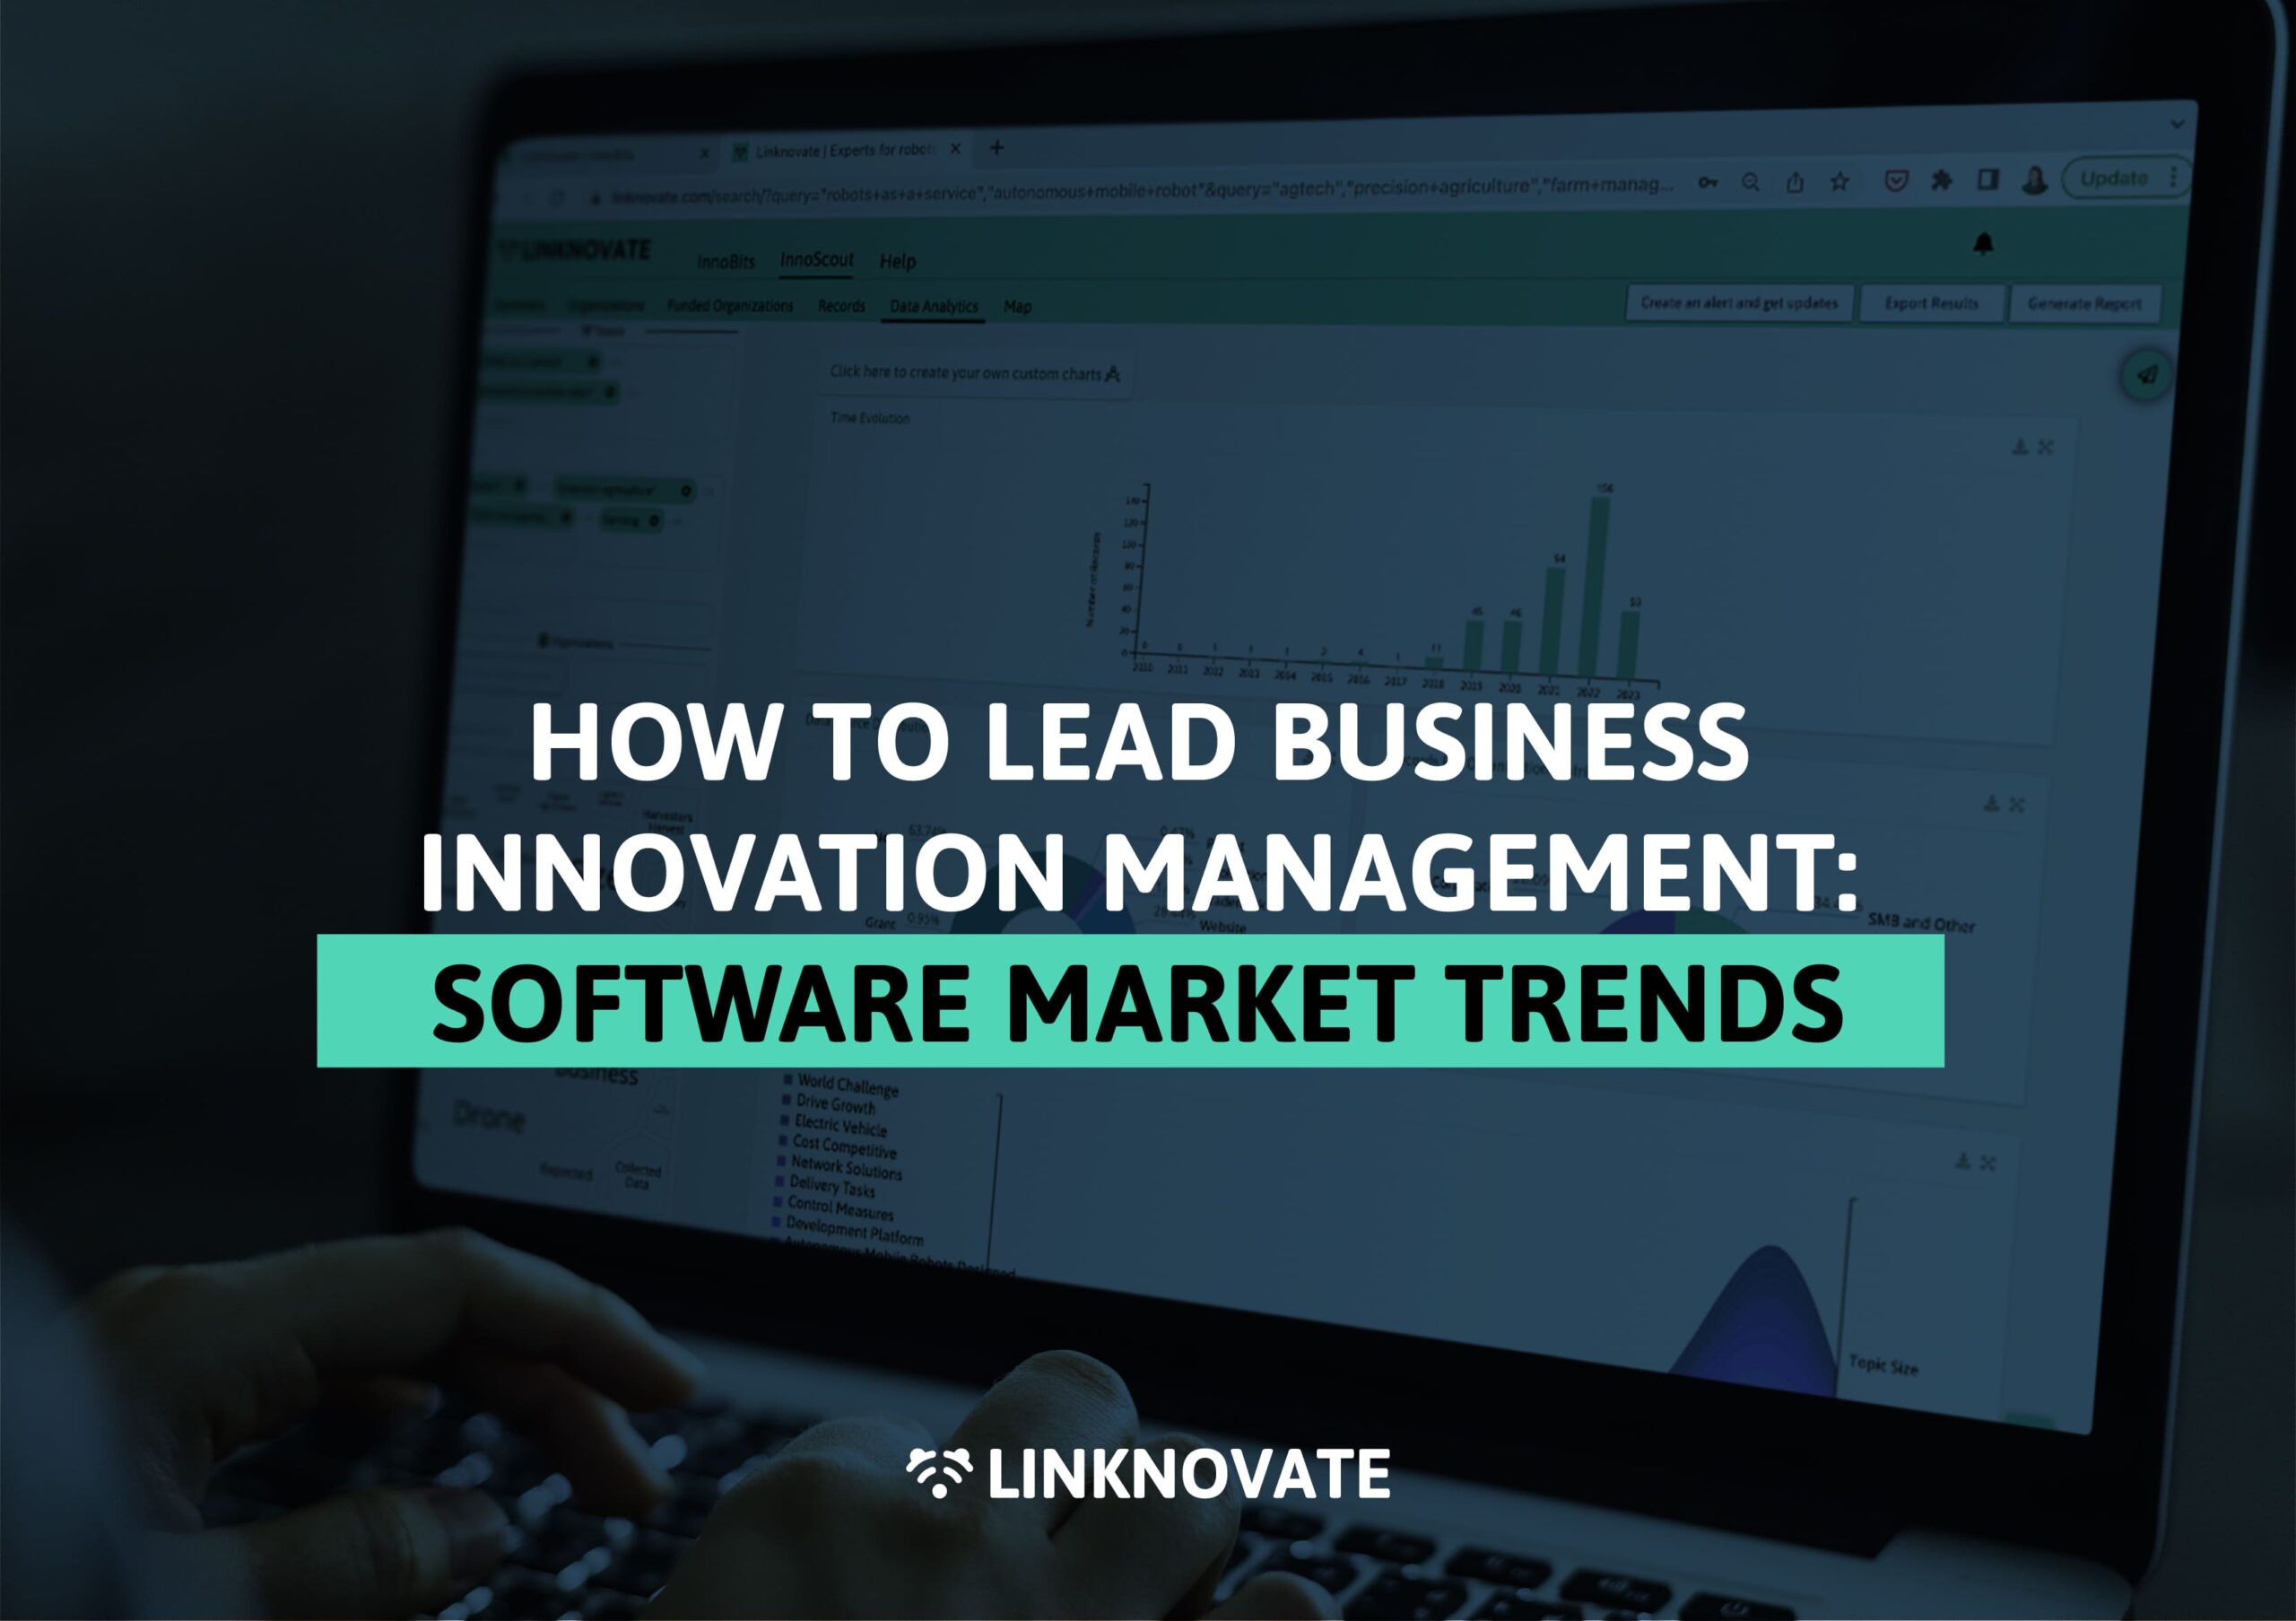 How to Lead Business Innovation Management: Software Market Trends